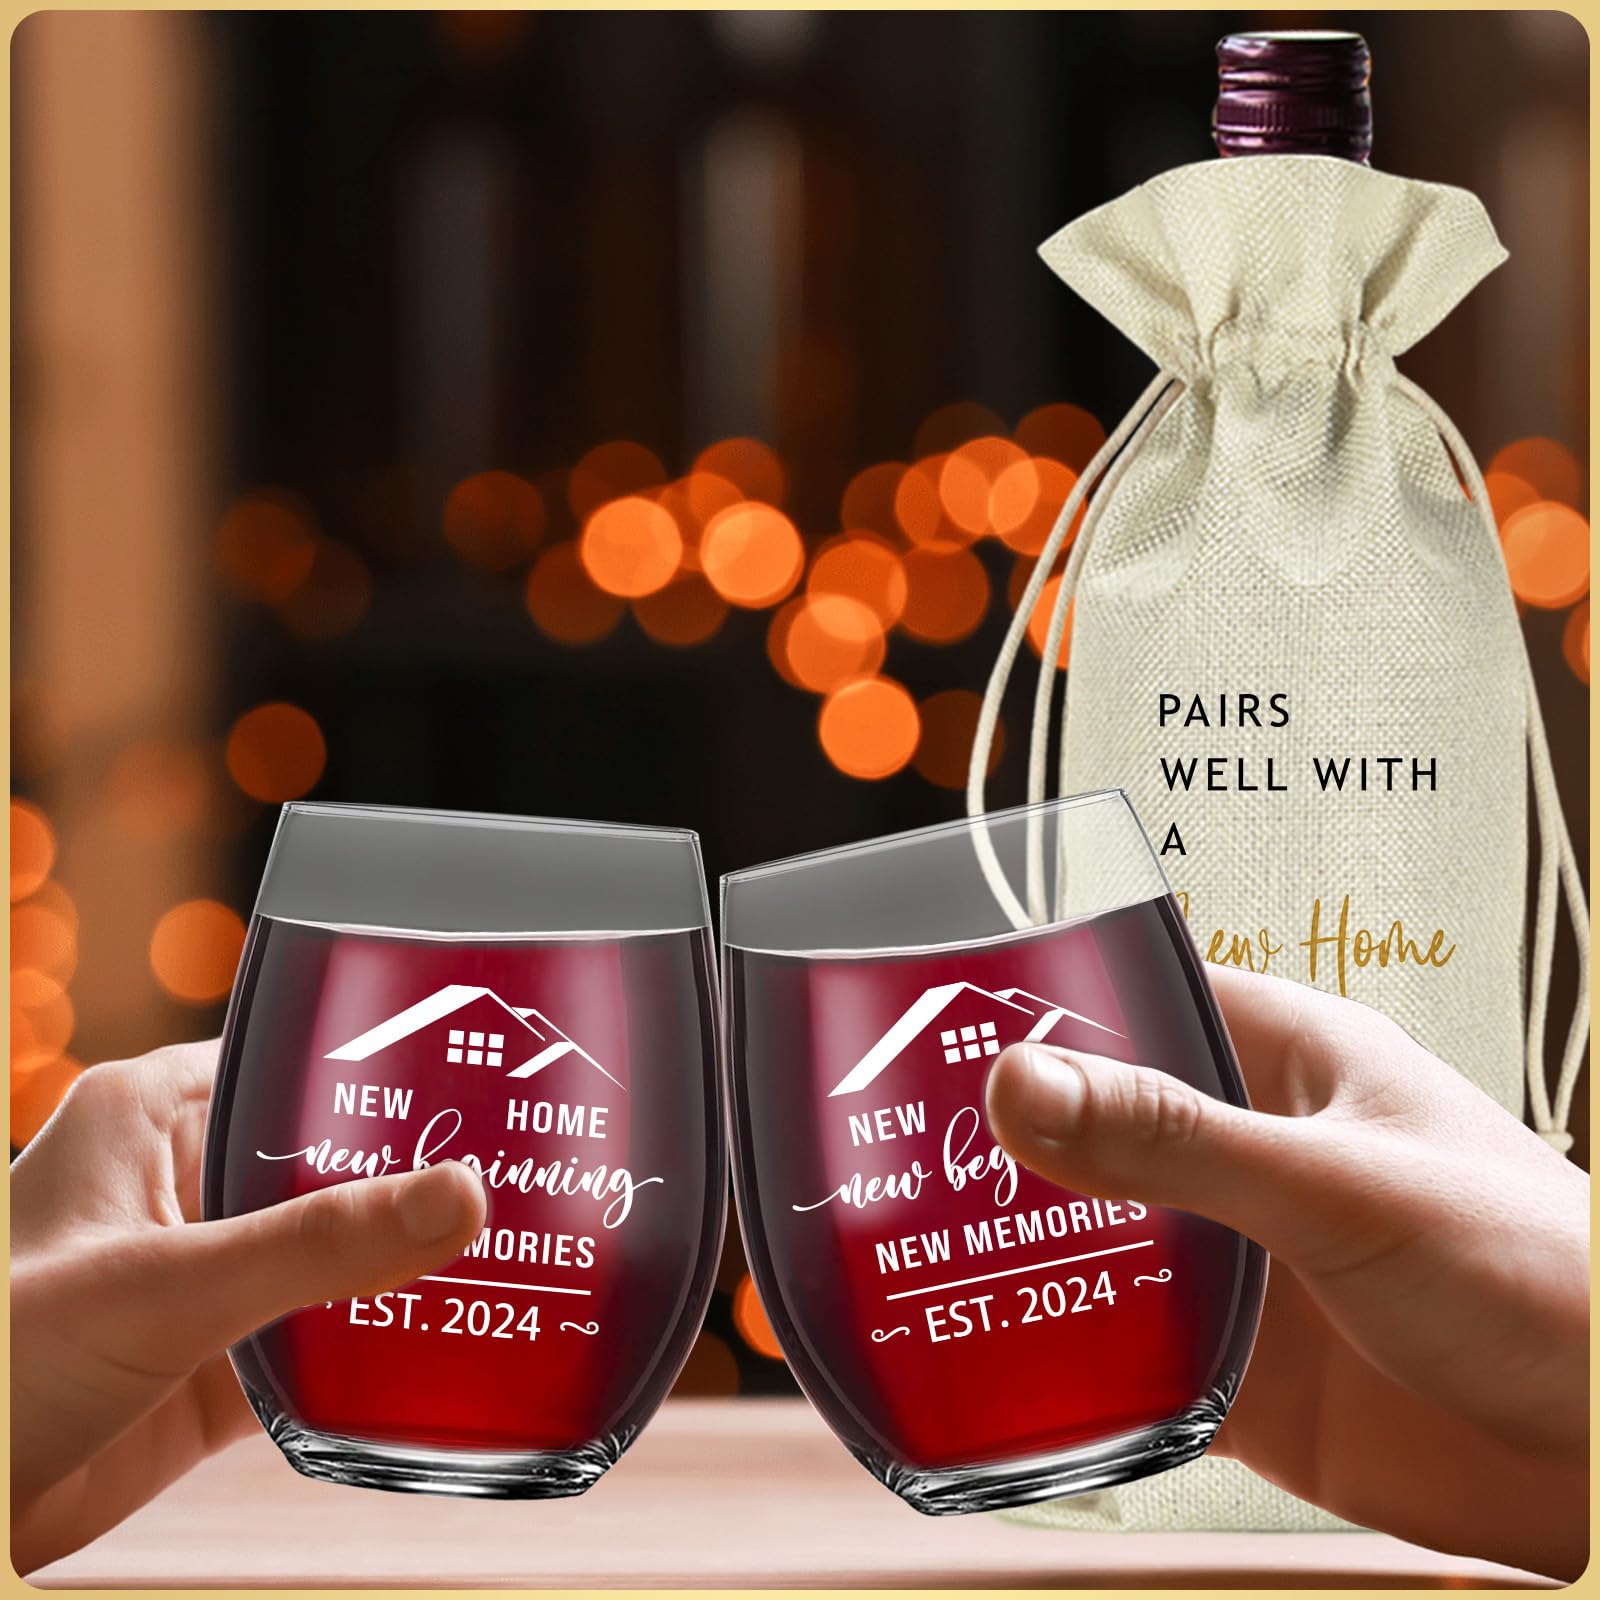 House Warming Gifts New Home, Housewarming gifts for New House, New Home Gifts for Home, Housewarming gift Stemless Wine Glass & Bottle Gift Bag Set for Newlywed Couple, Friends (2 Glasses, 1 Bag)